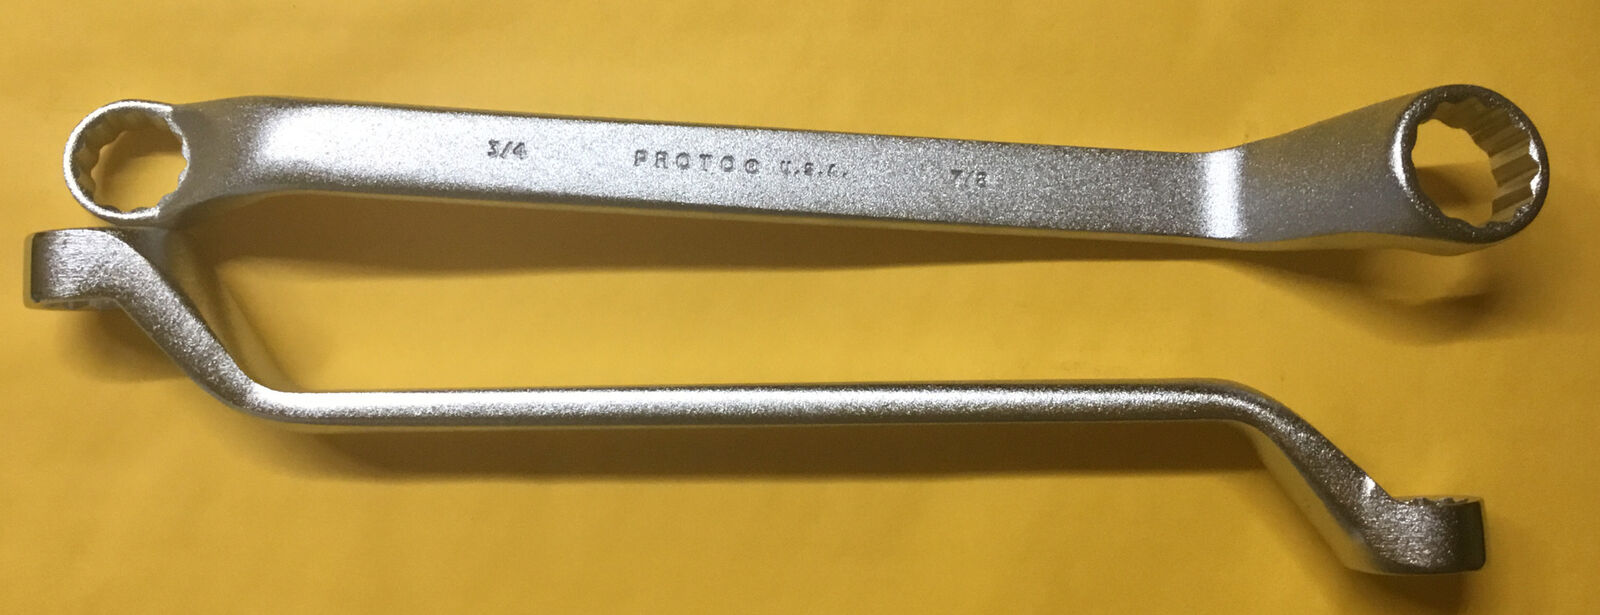 PROTO 8164 PROFESSIONAL OFFSET BOX WRENCH 3/4\